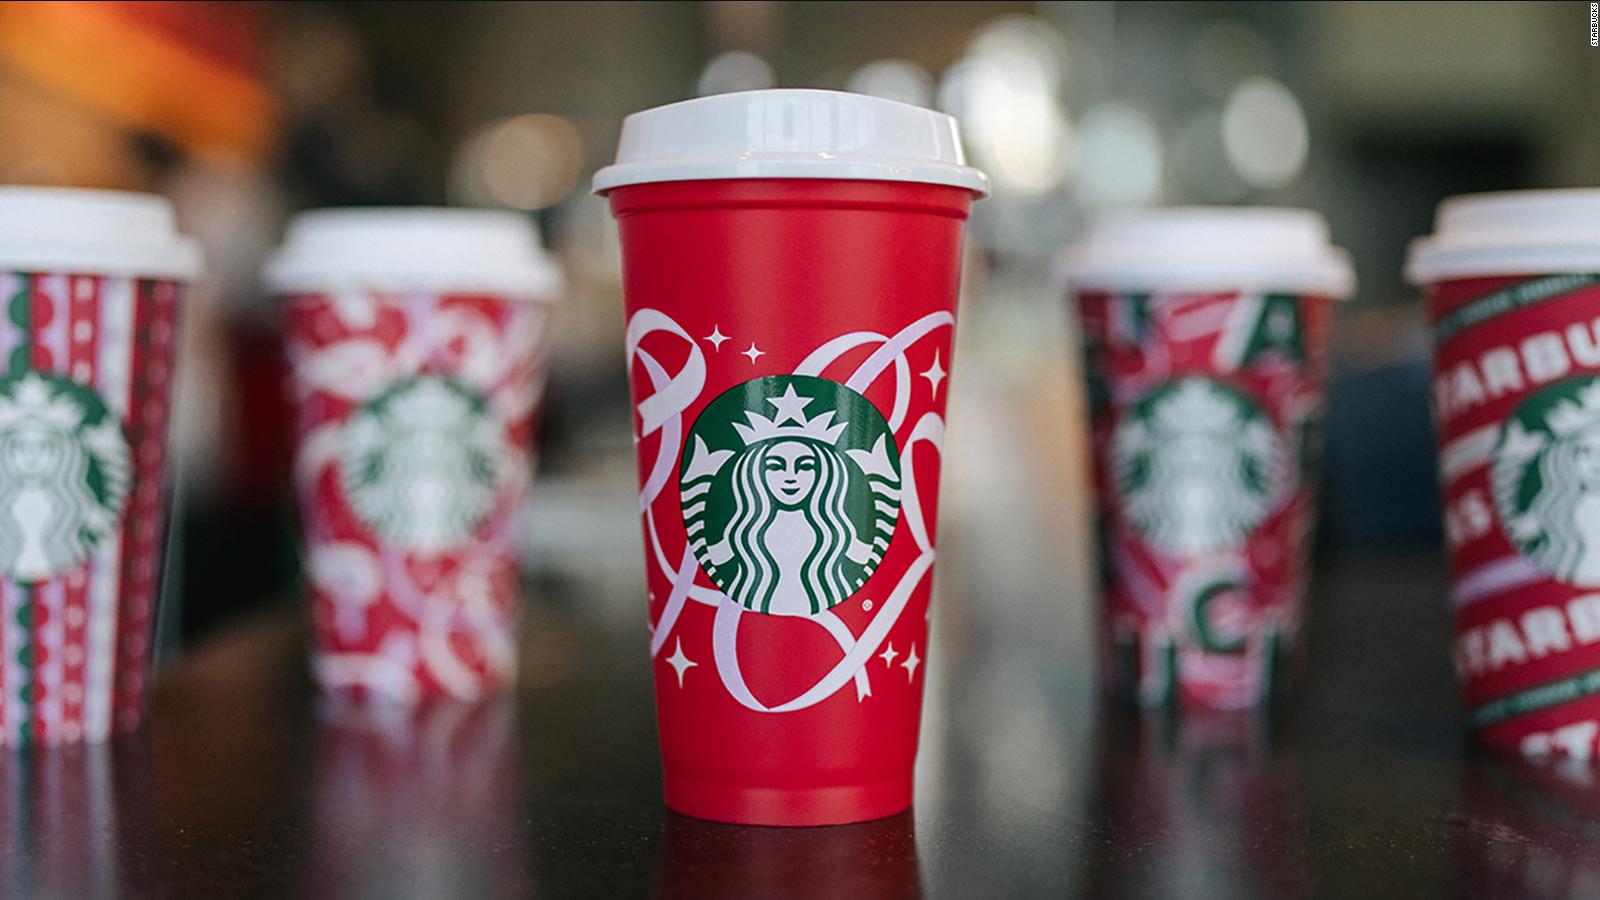 Starbucks red cup day How to get a free reusable cup CNN